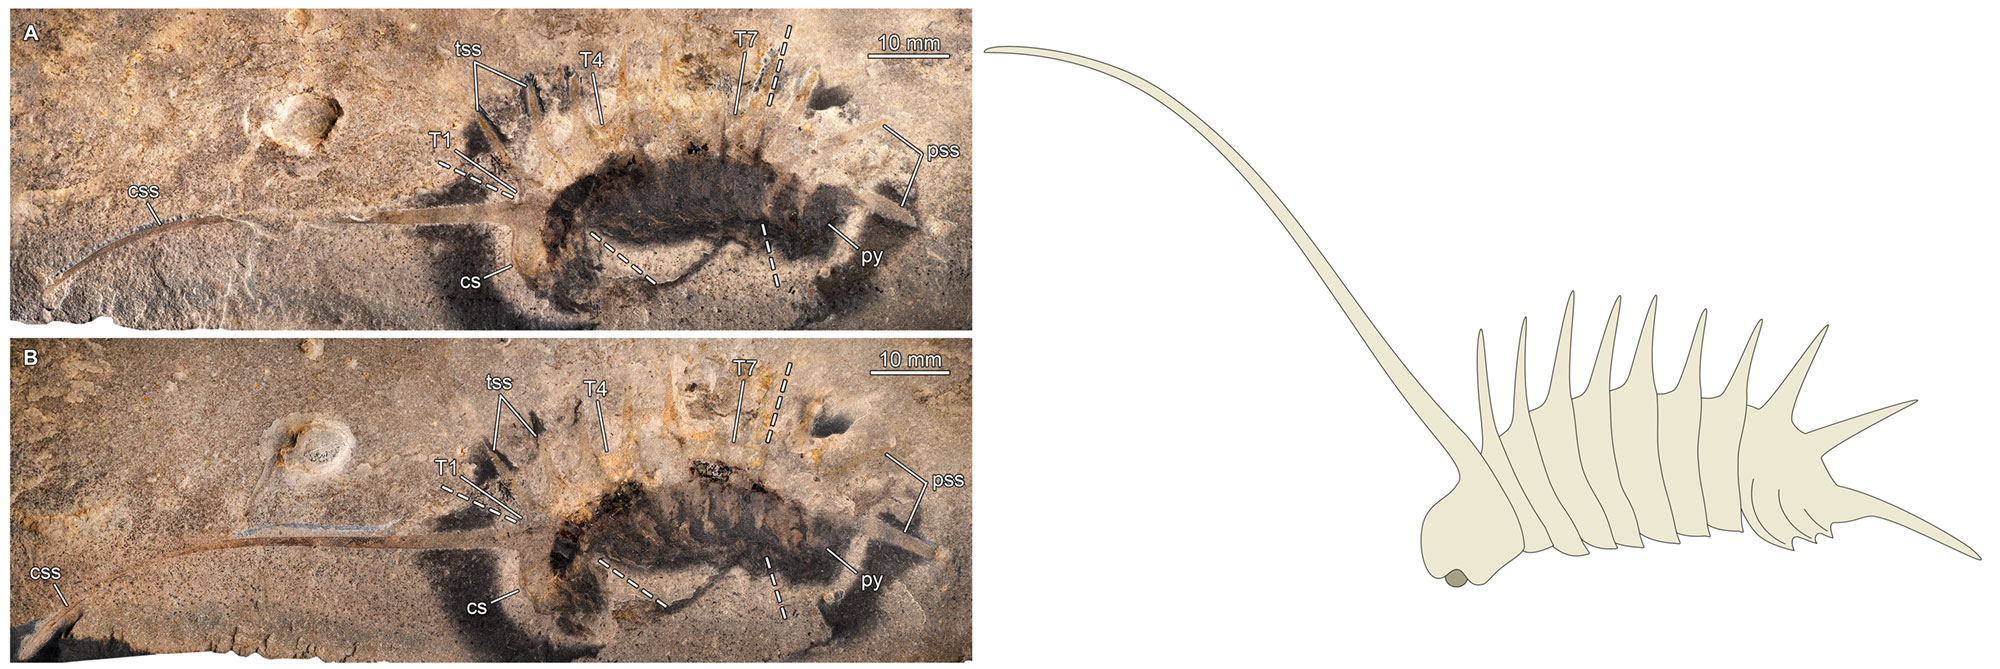 3-panel image of the soft-bodied arthropod Thelixiope from the Cambrian of Utah. Panels 1 and 2 show the part and counterpart of a single specimen. The animal has a spine that is as long as or longer than its body extending from the top of its head. The body behind the head is made up of segments, each with one prominent spine projecting from the top. Specimens are several centimeters long. The third panel is a drawing showing how the arthropod may have appeared in life.